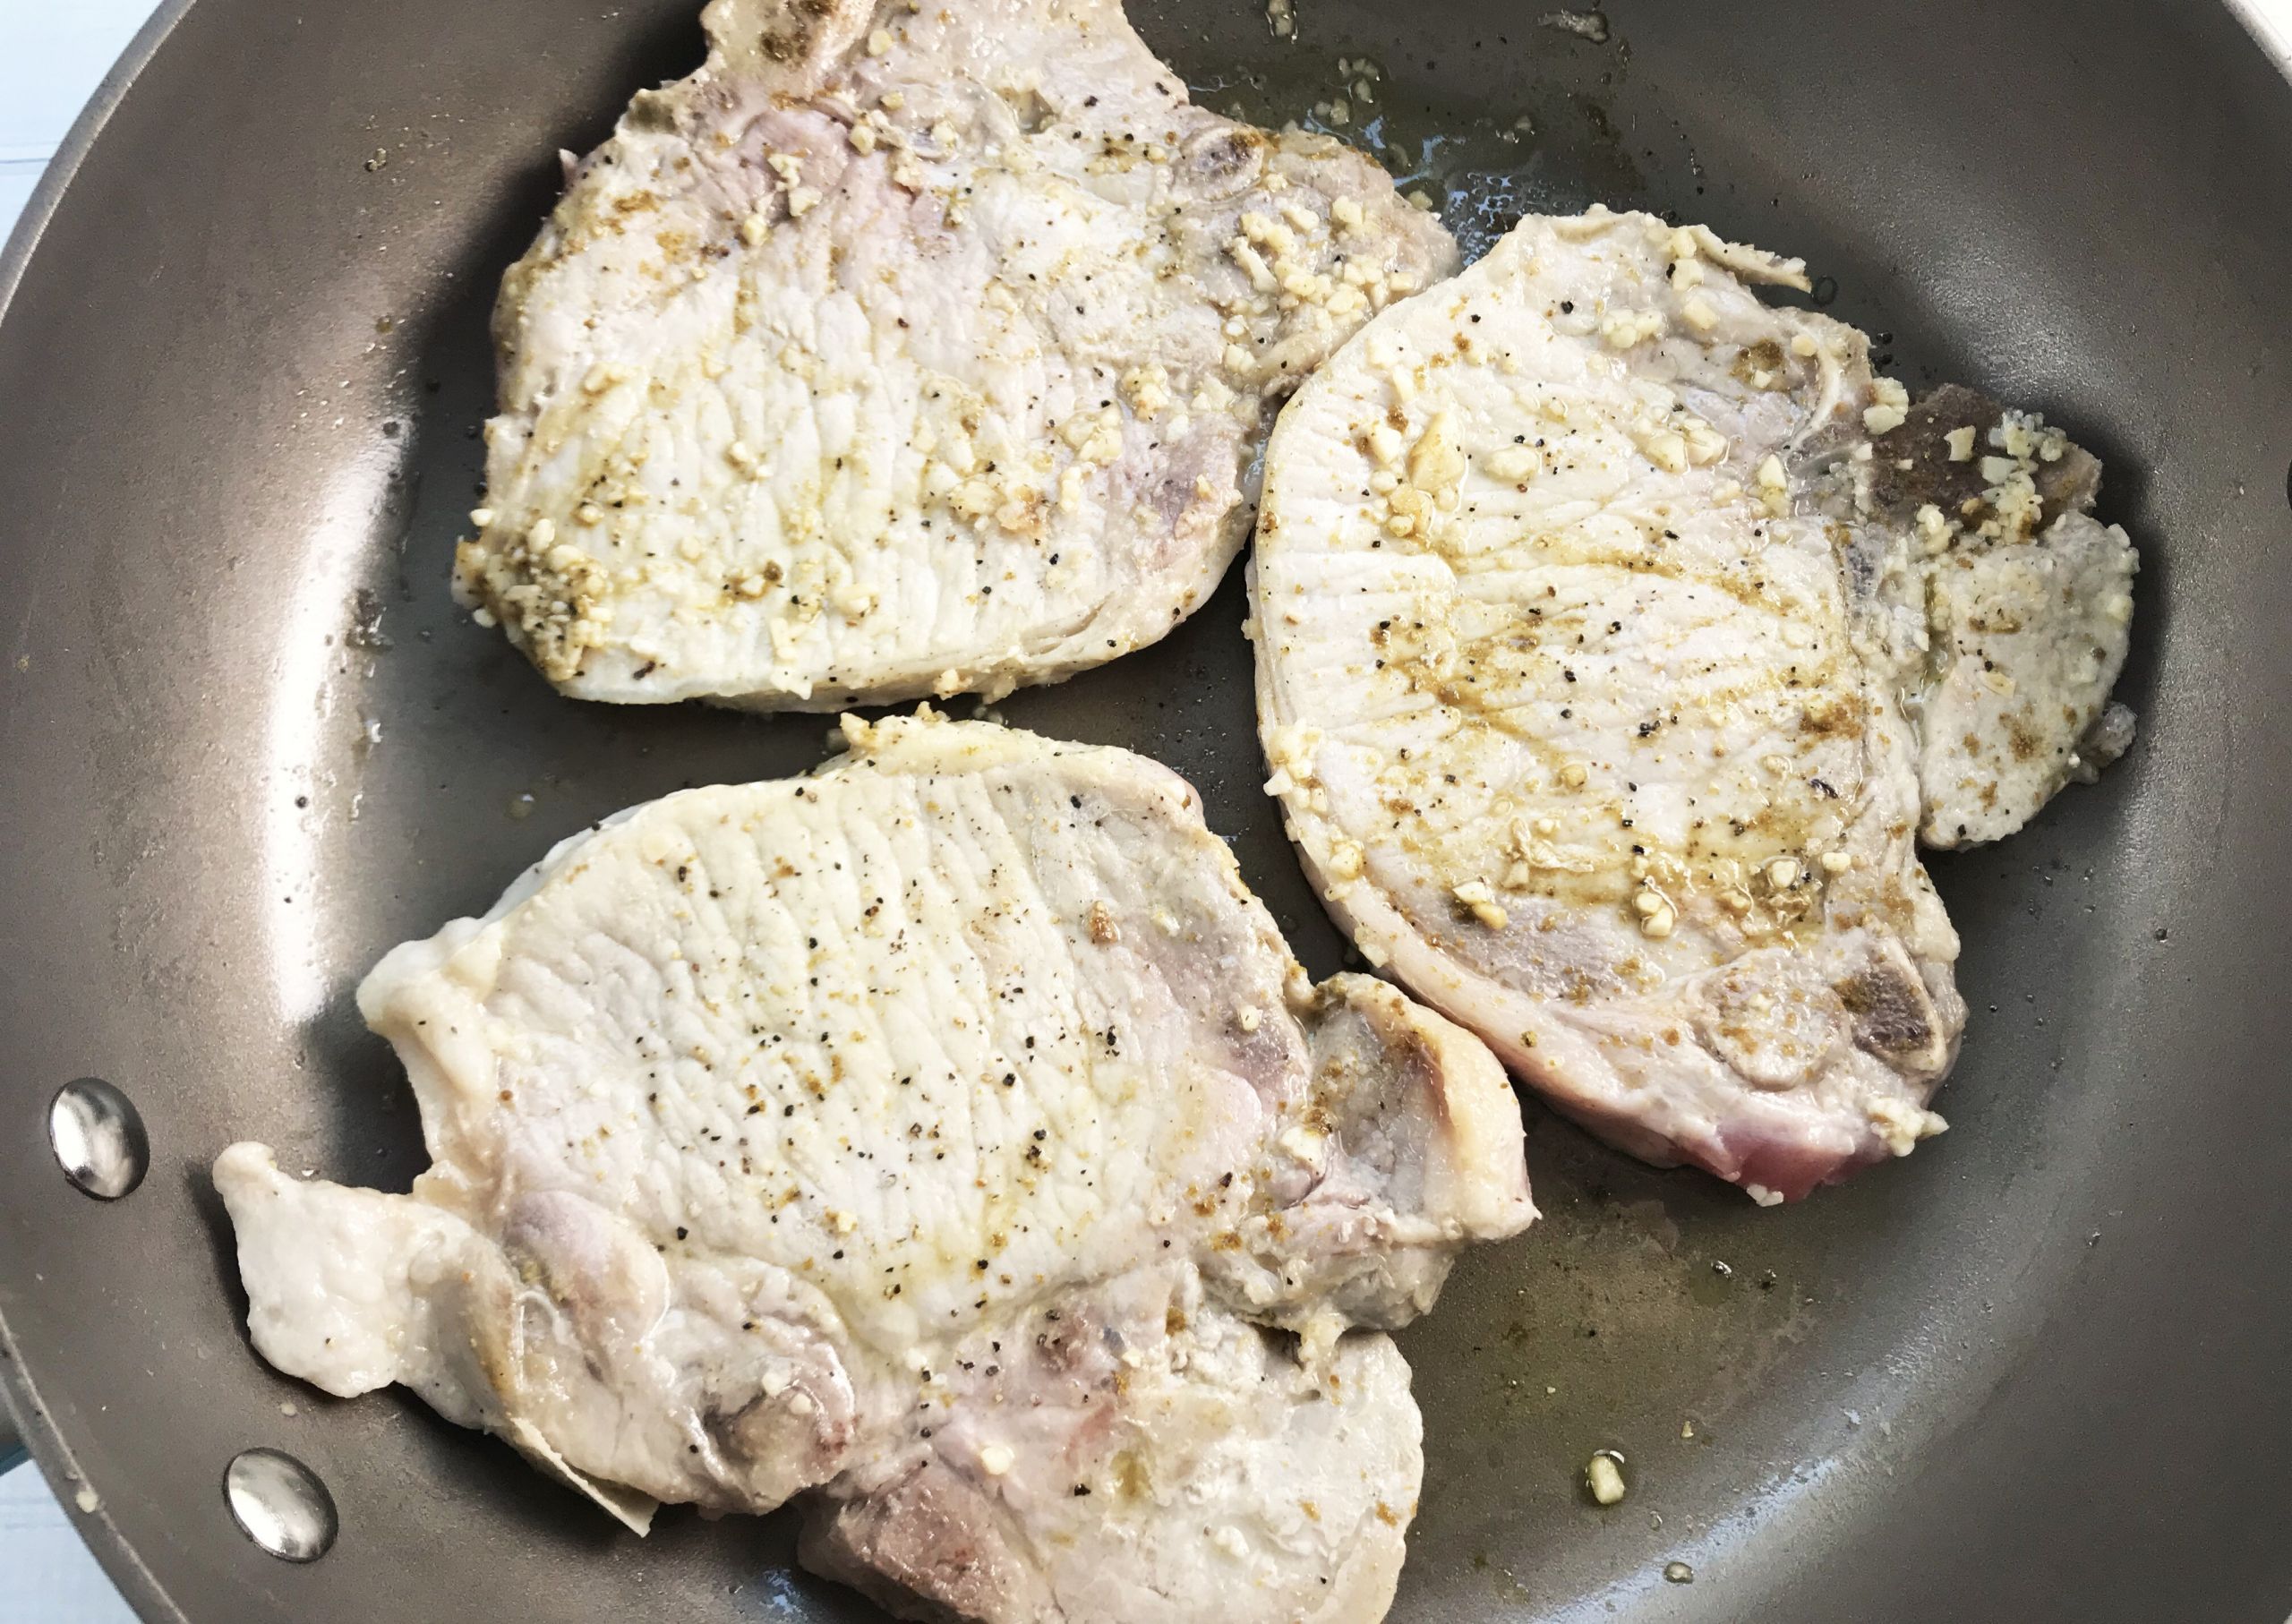 Salsa Verde Pork Chops
 Salsa Verde Pork Chops Low Carb and Keto Friendly Dinner